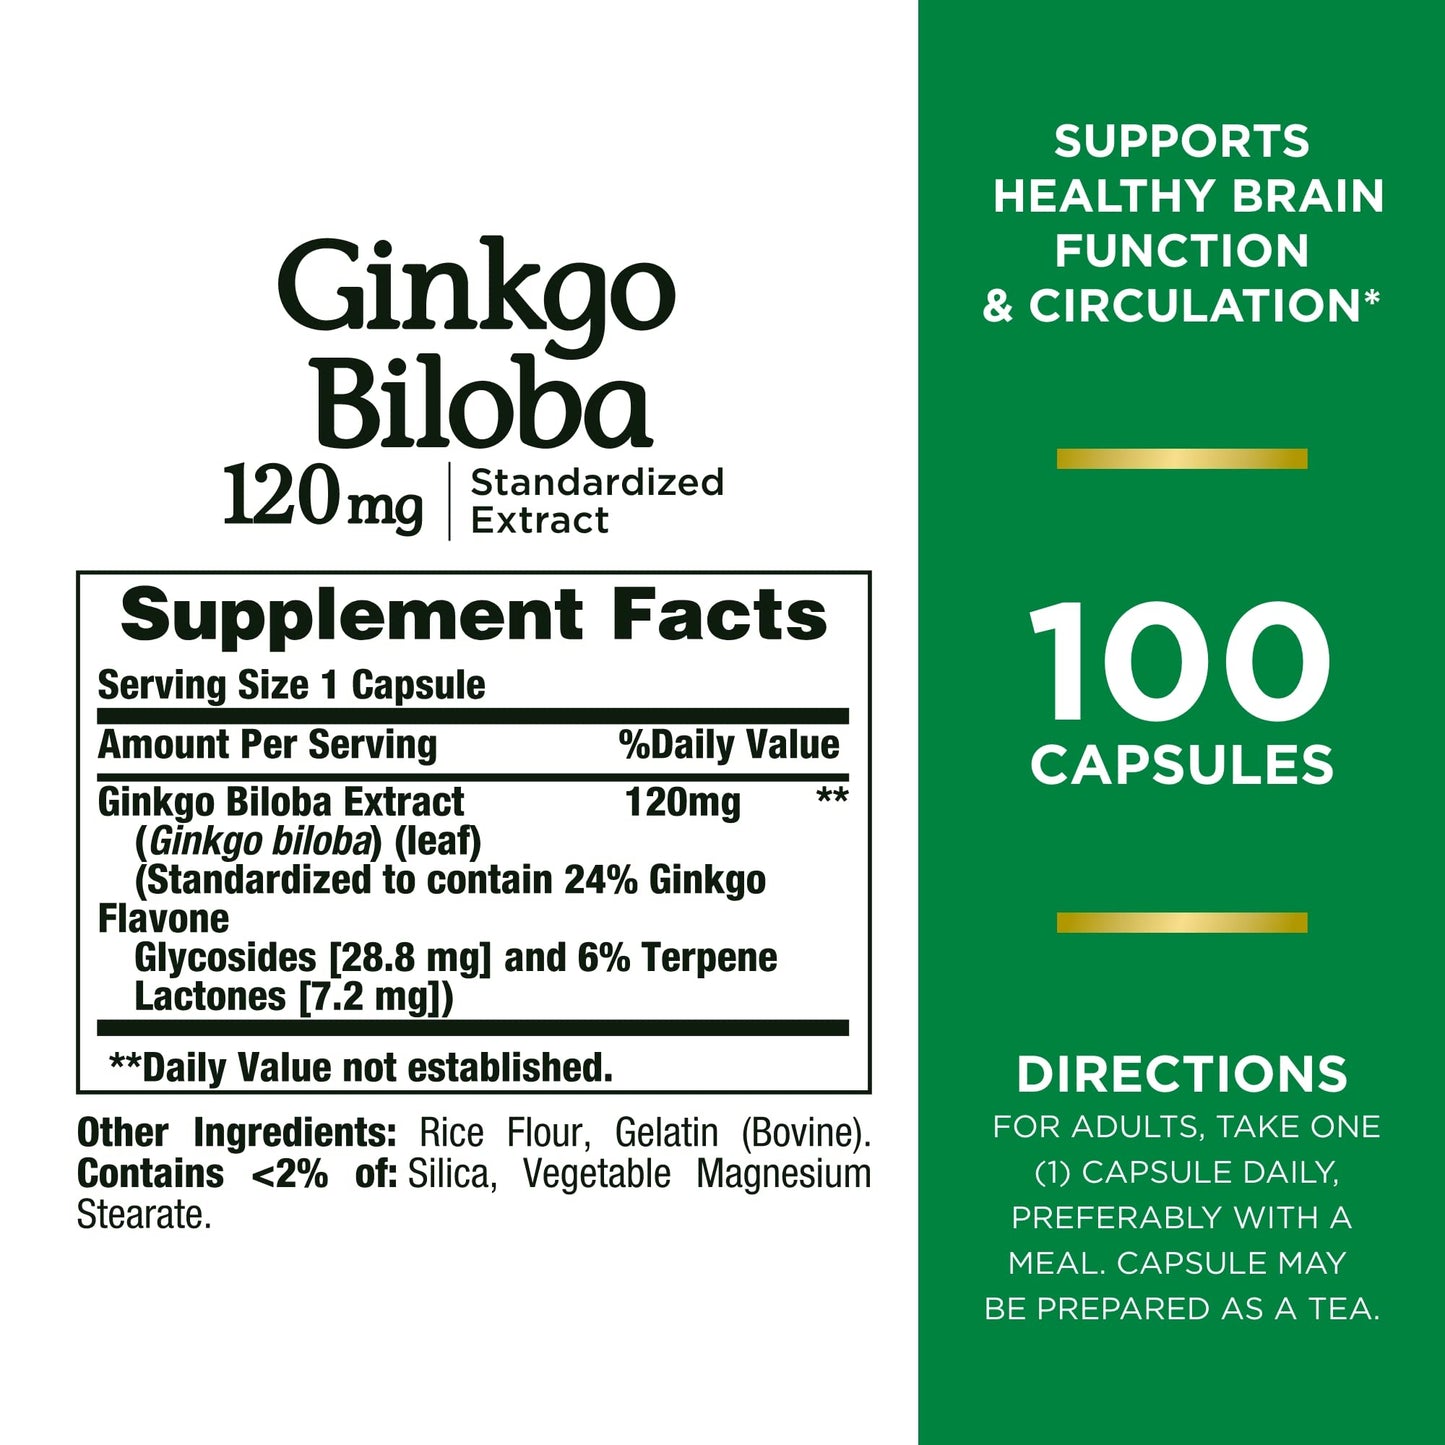 Nature's Bounty Ginkgo Biloba Capsules 120mg, Memory Support Supplement, Supports Brain Function and Mental Alertness, 100 Capsules - Ome's Beauty Mart